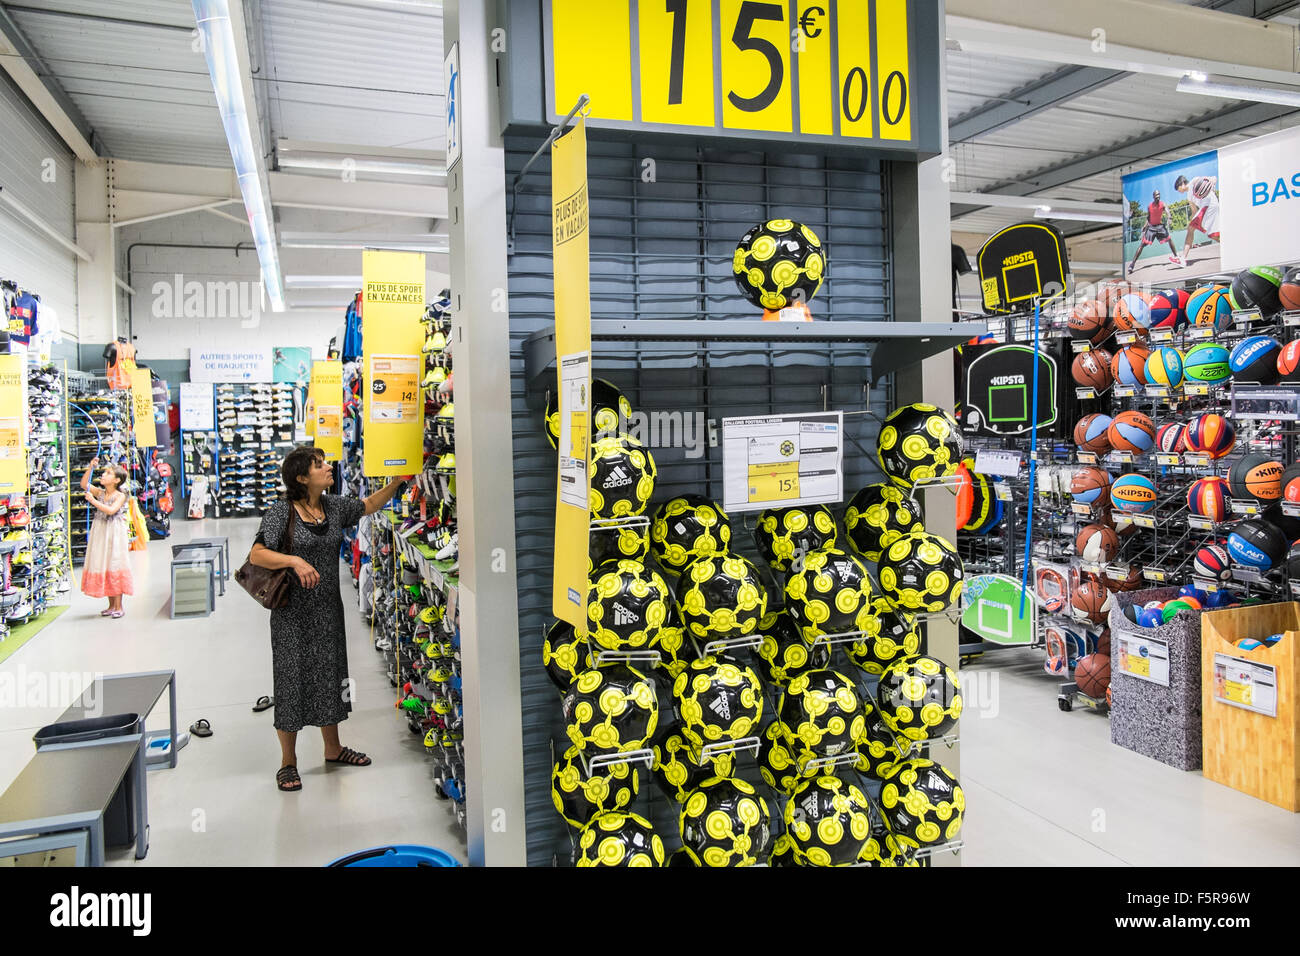 Bargain,cheap,Decathlon,sport, sports, shop,sports shop,outlet,store,huge,shopping,superstore, in, of France,France,Europe - Alamy